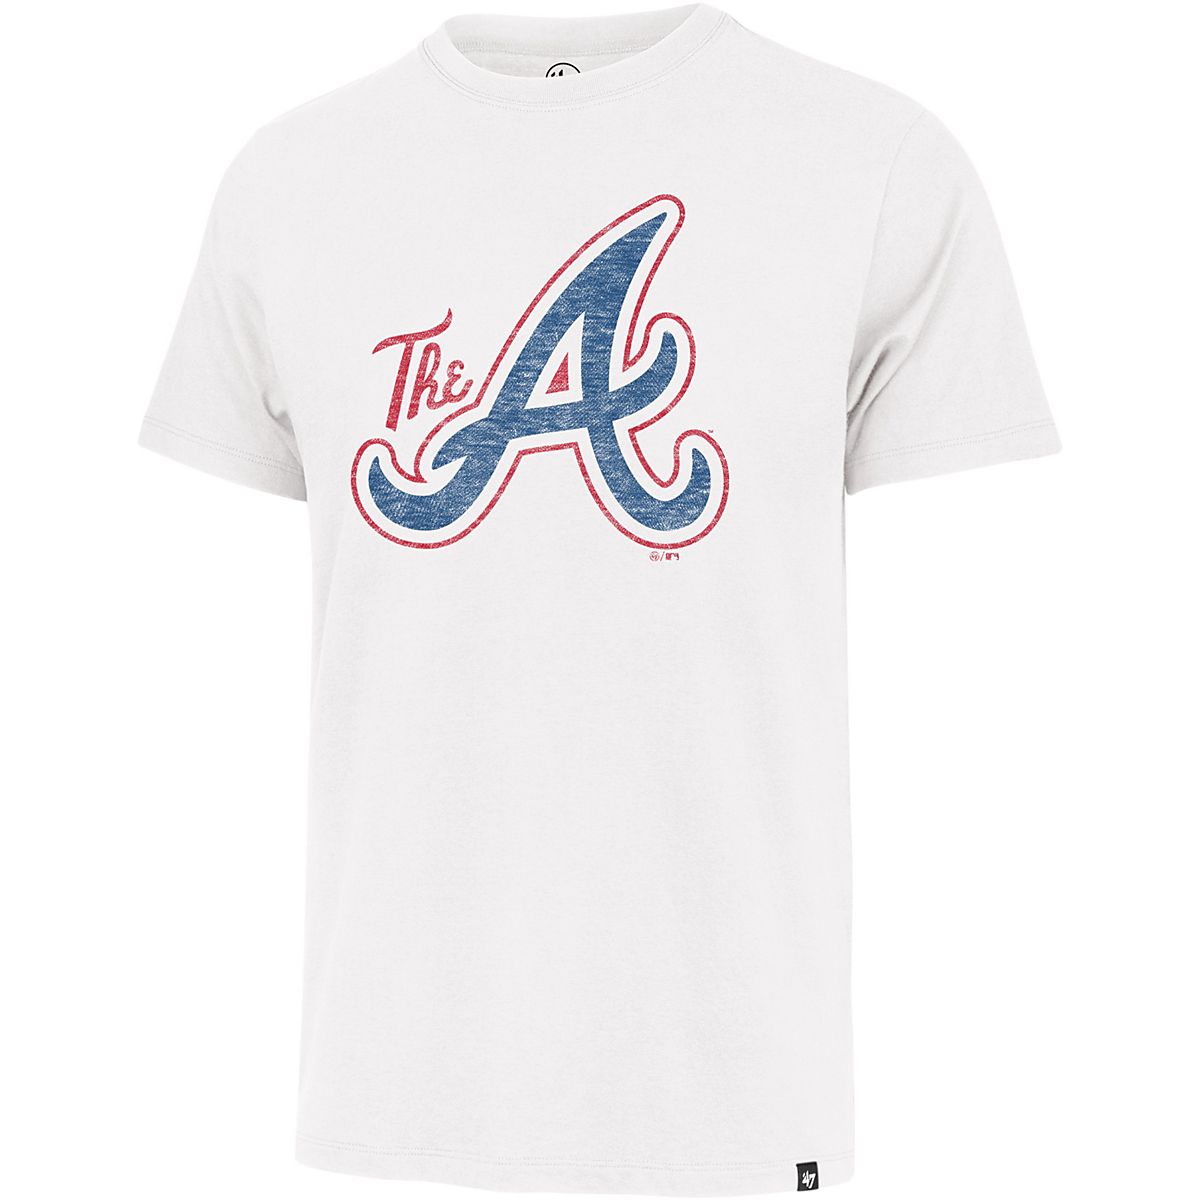 Atlanta Braves - Now introducing the '47 t-shirts designed